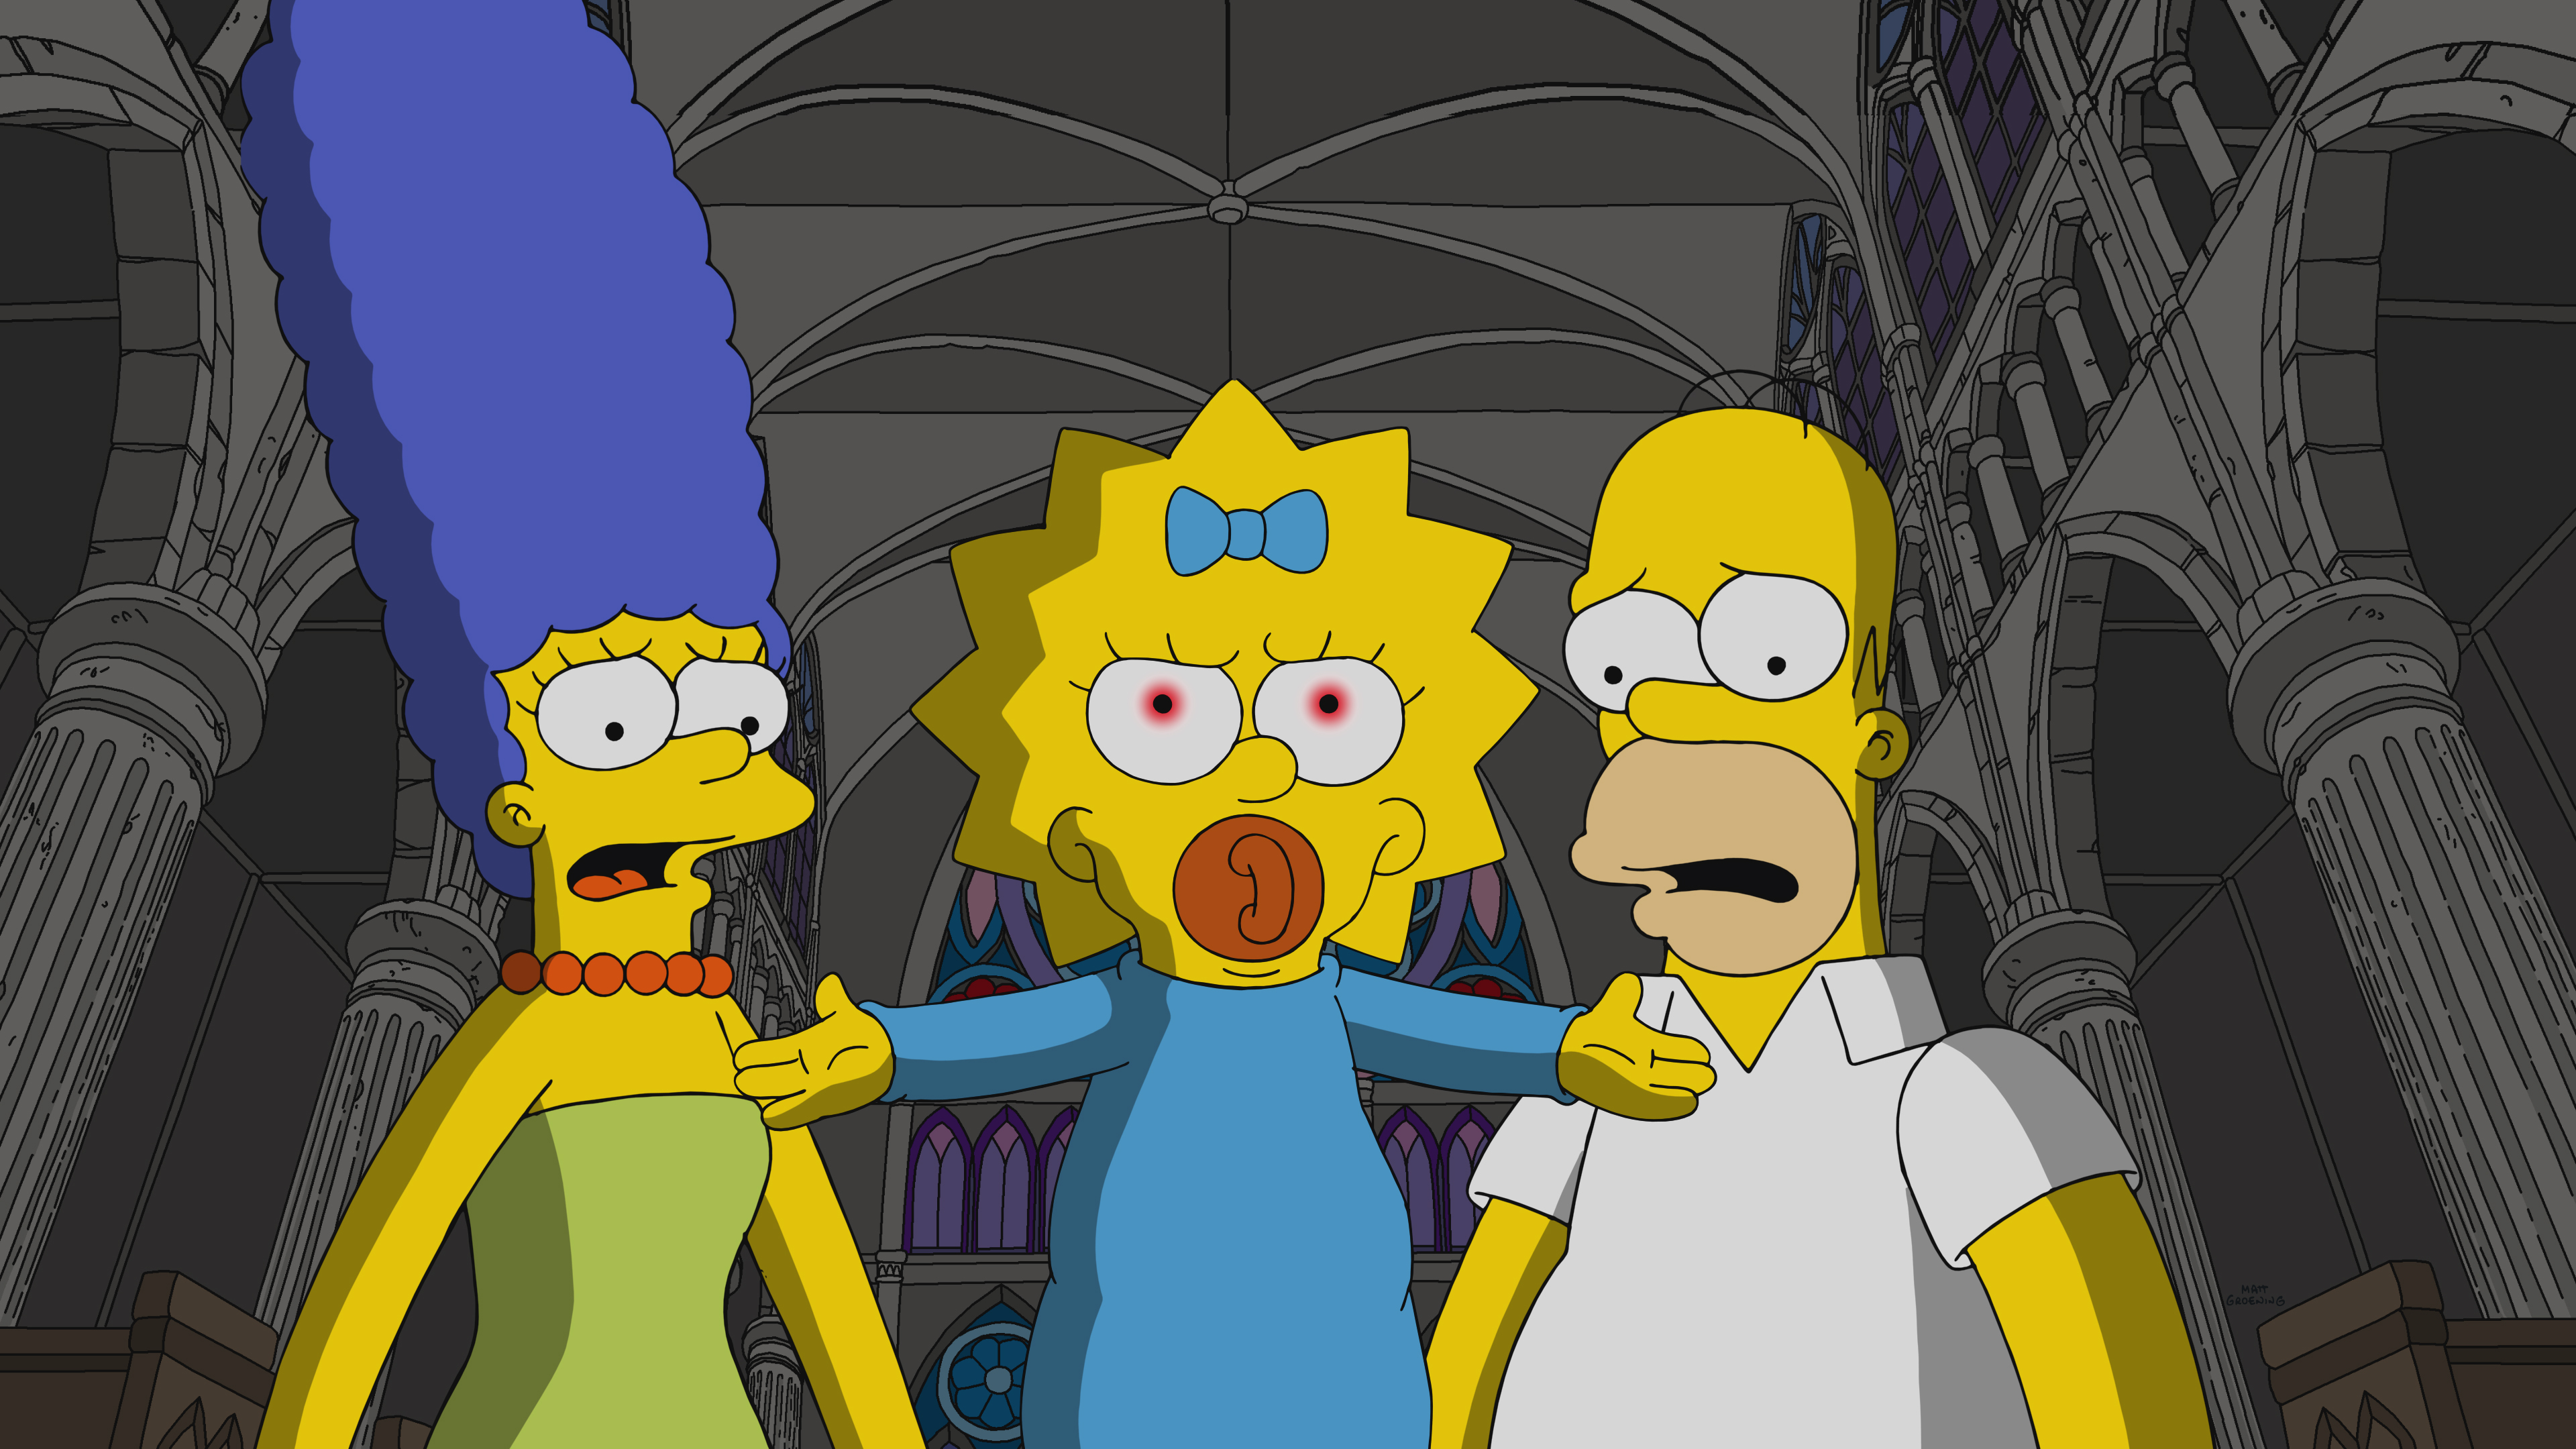 Season 31 News: Promotional images for “Treehouse of Horror XXX” have